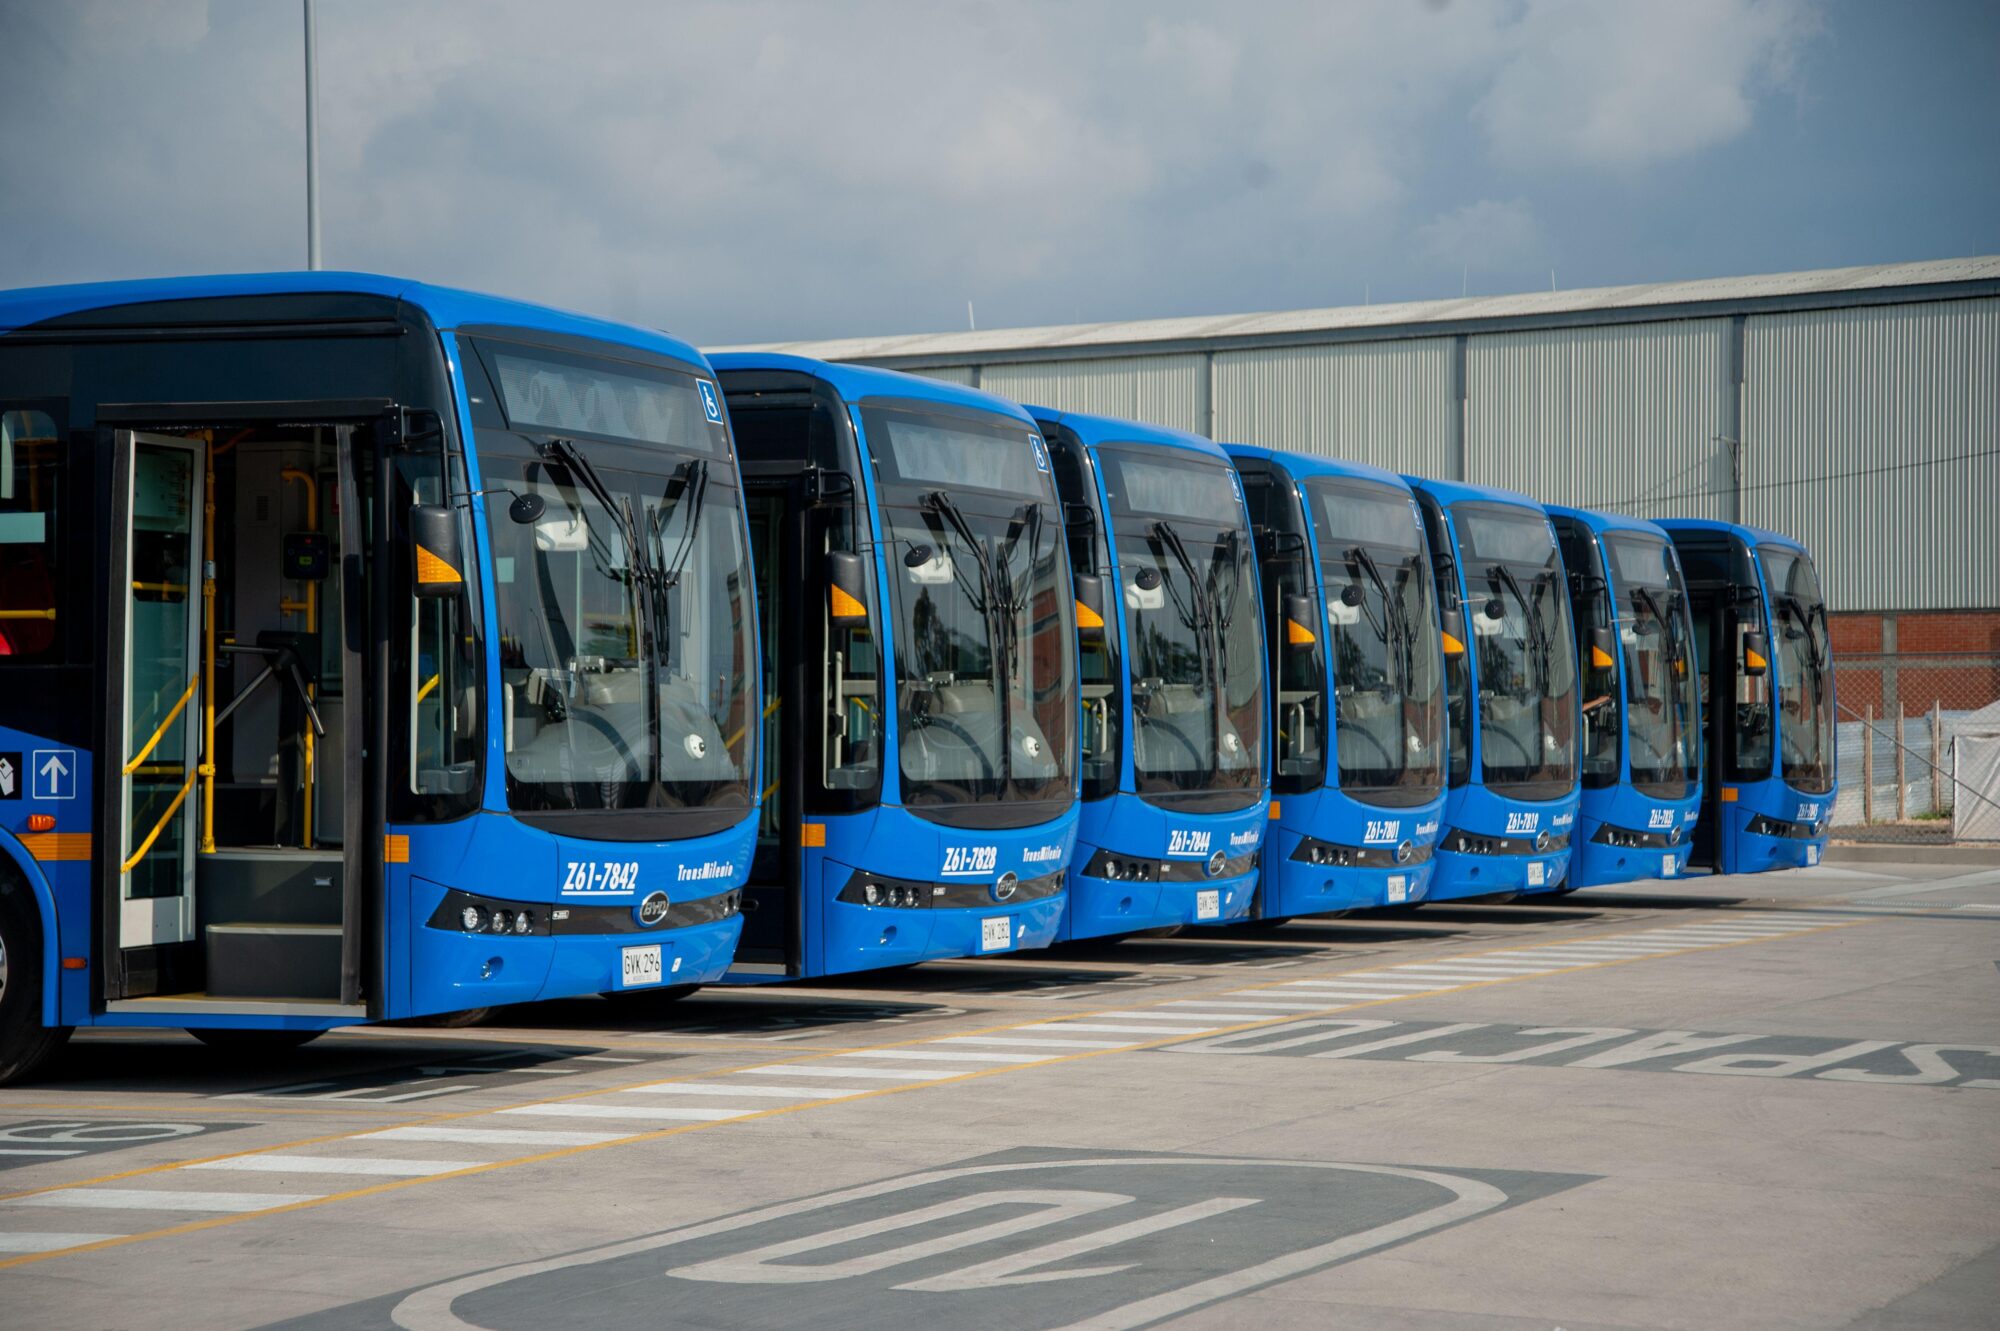 <p>Electric buses in Bogotá’s public transport fleet, manufactured by the Chinese company BYD. Around 90% of electric buses and trucks in Colombia are Chinese-made. (Image: Chepa Beltran / Alamy)</p>